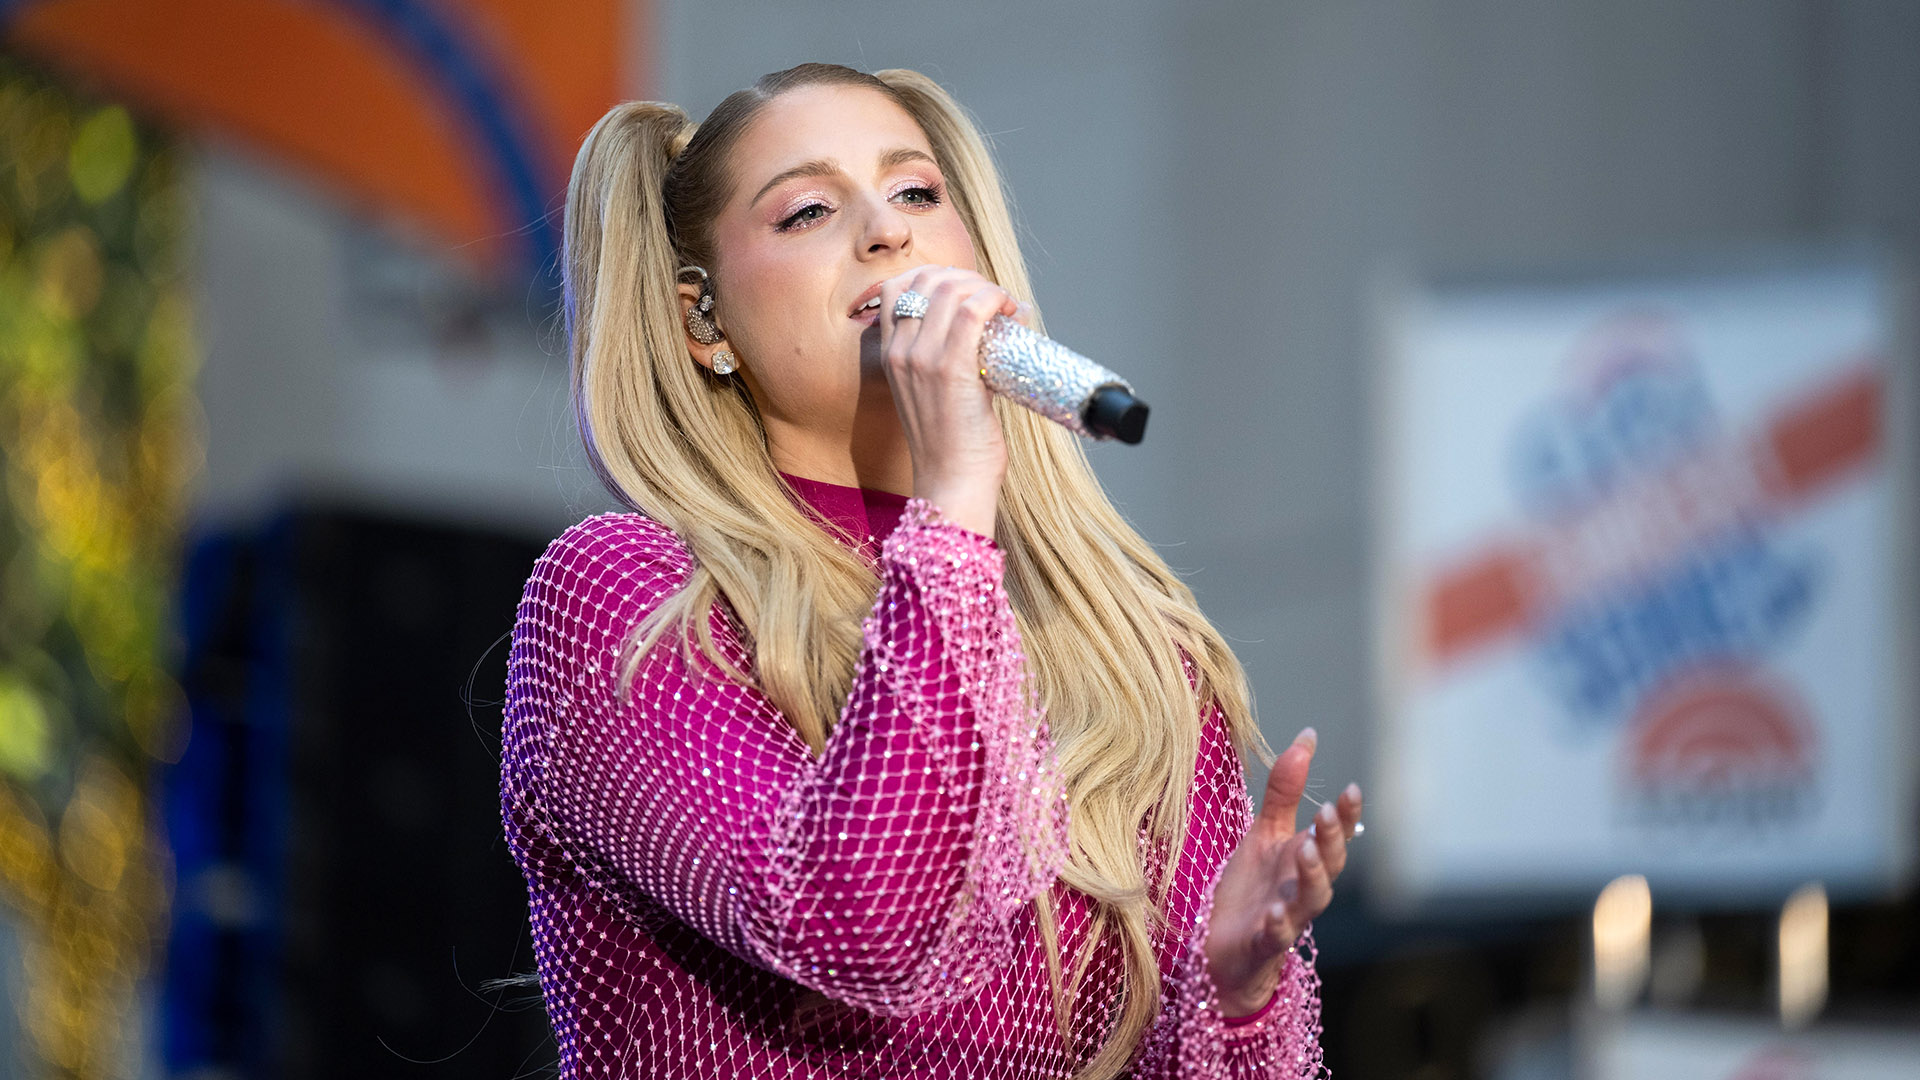 See Meghan Trainor sing new song 'Made You Look' on TODAY